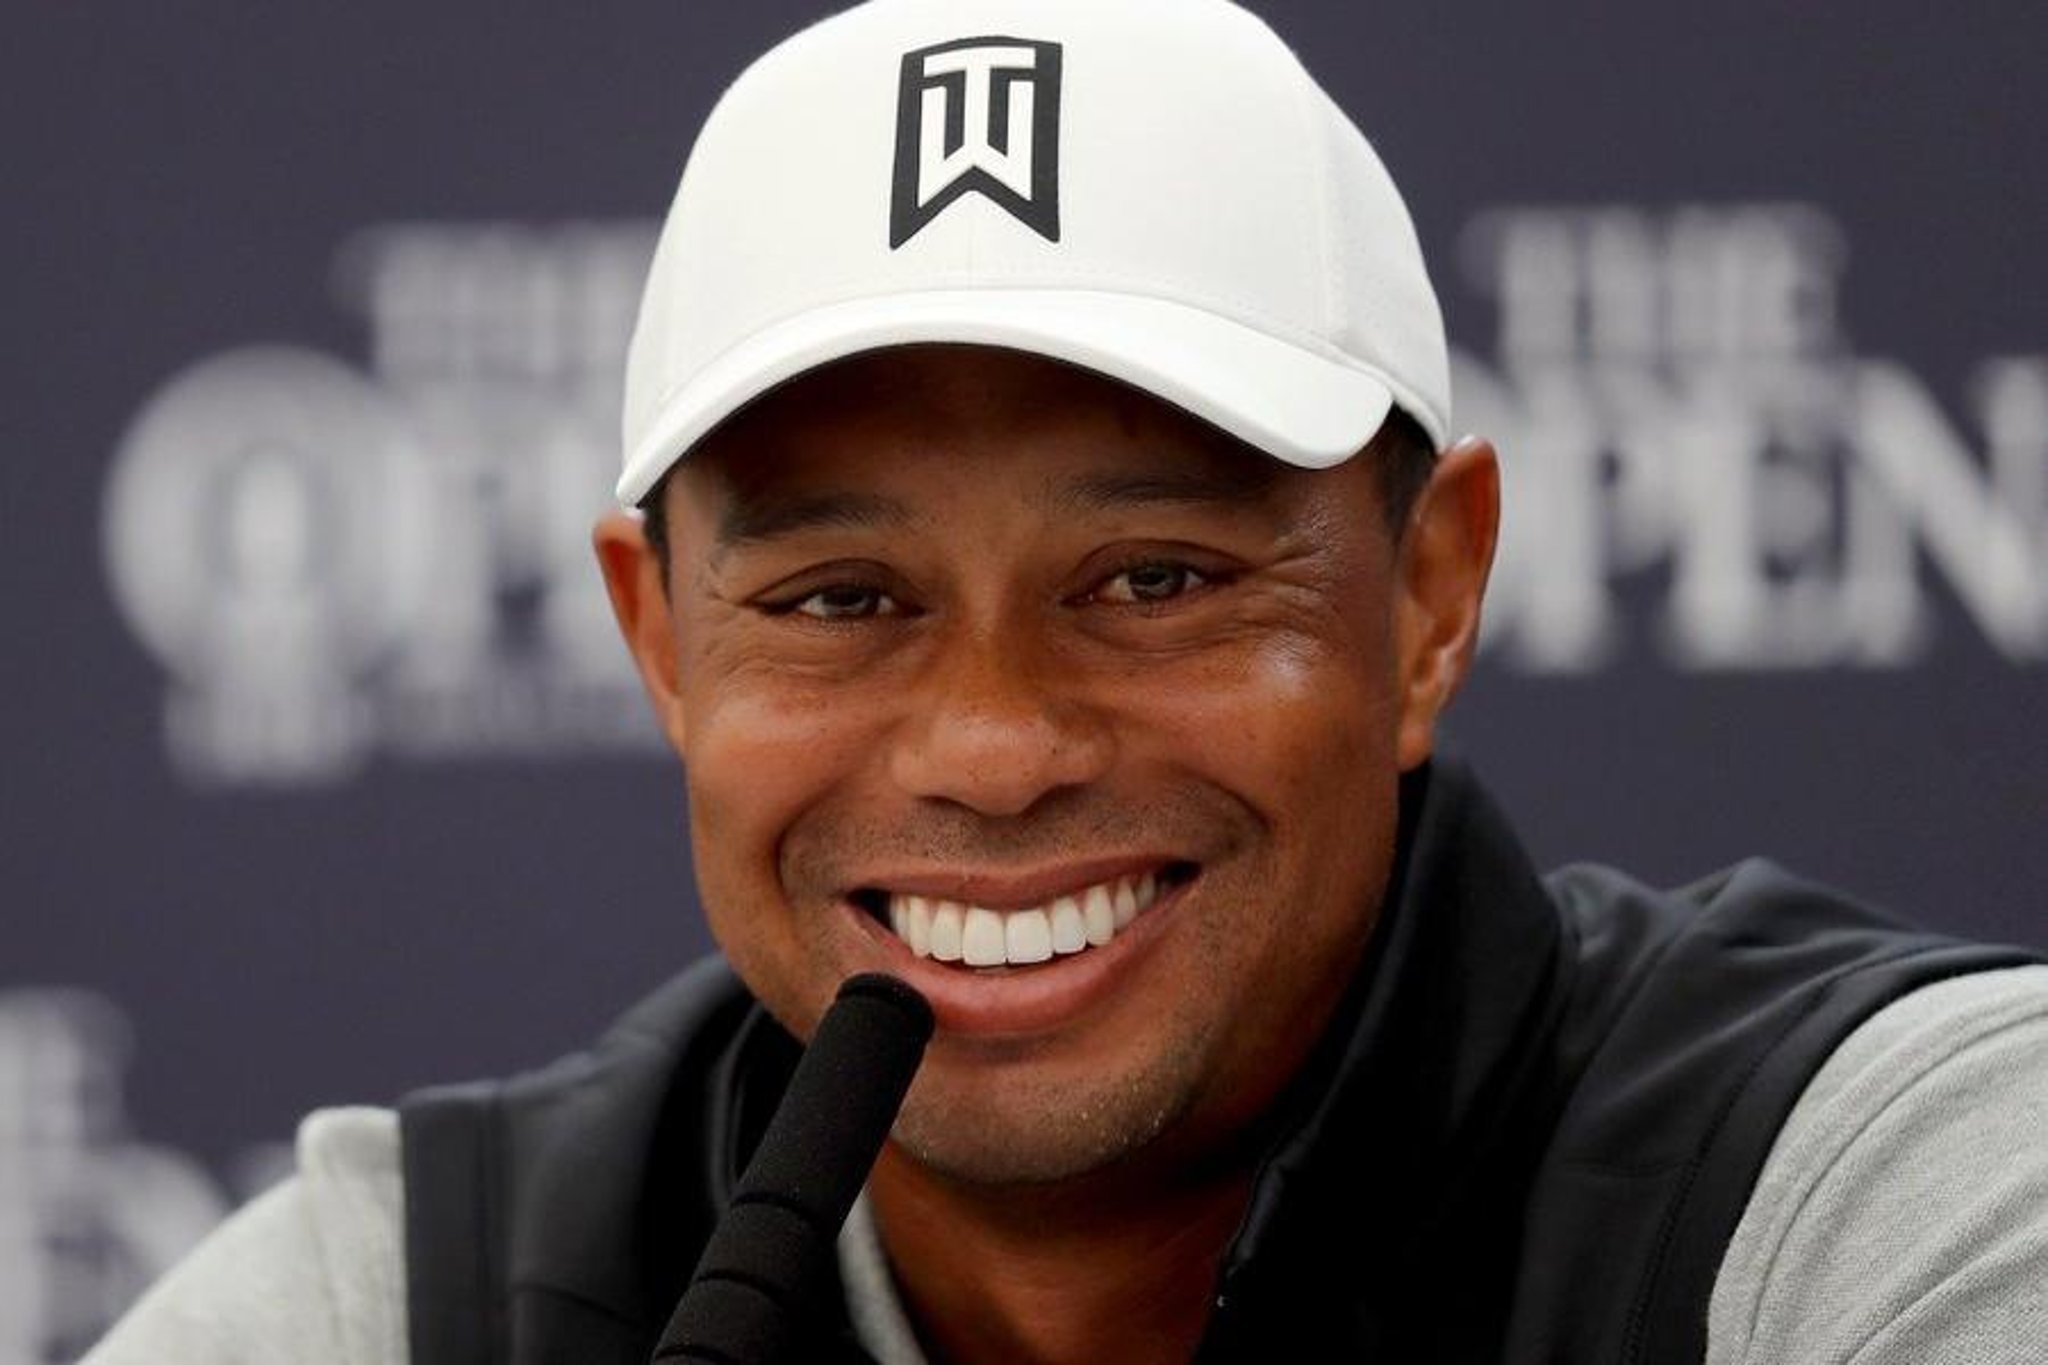 Tiger Woods coming to Ireland to play in the 2022 JP McManus Pro-Am - where can I buy tickets?